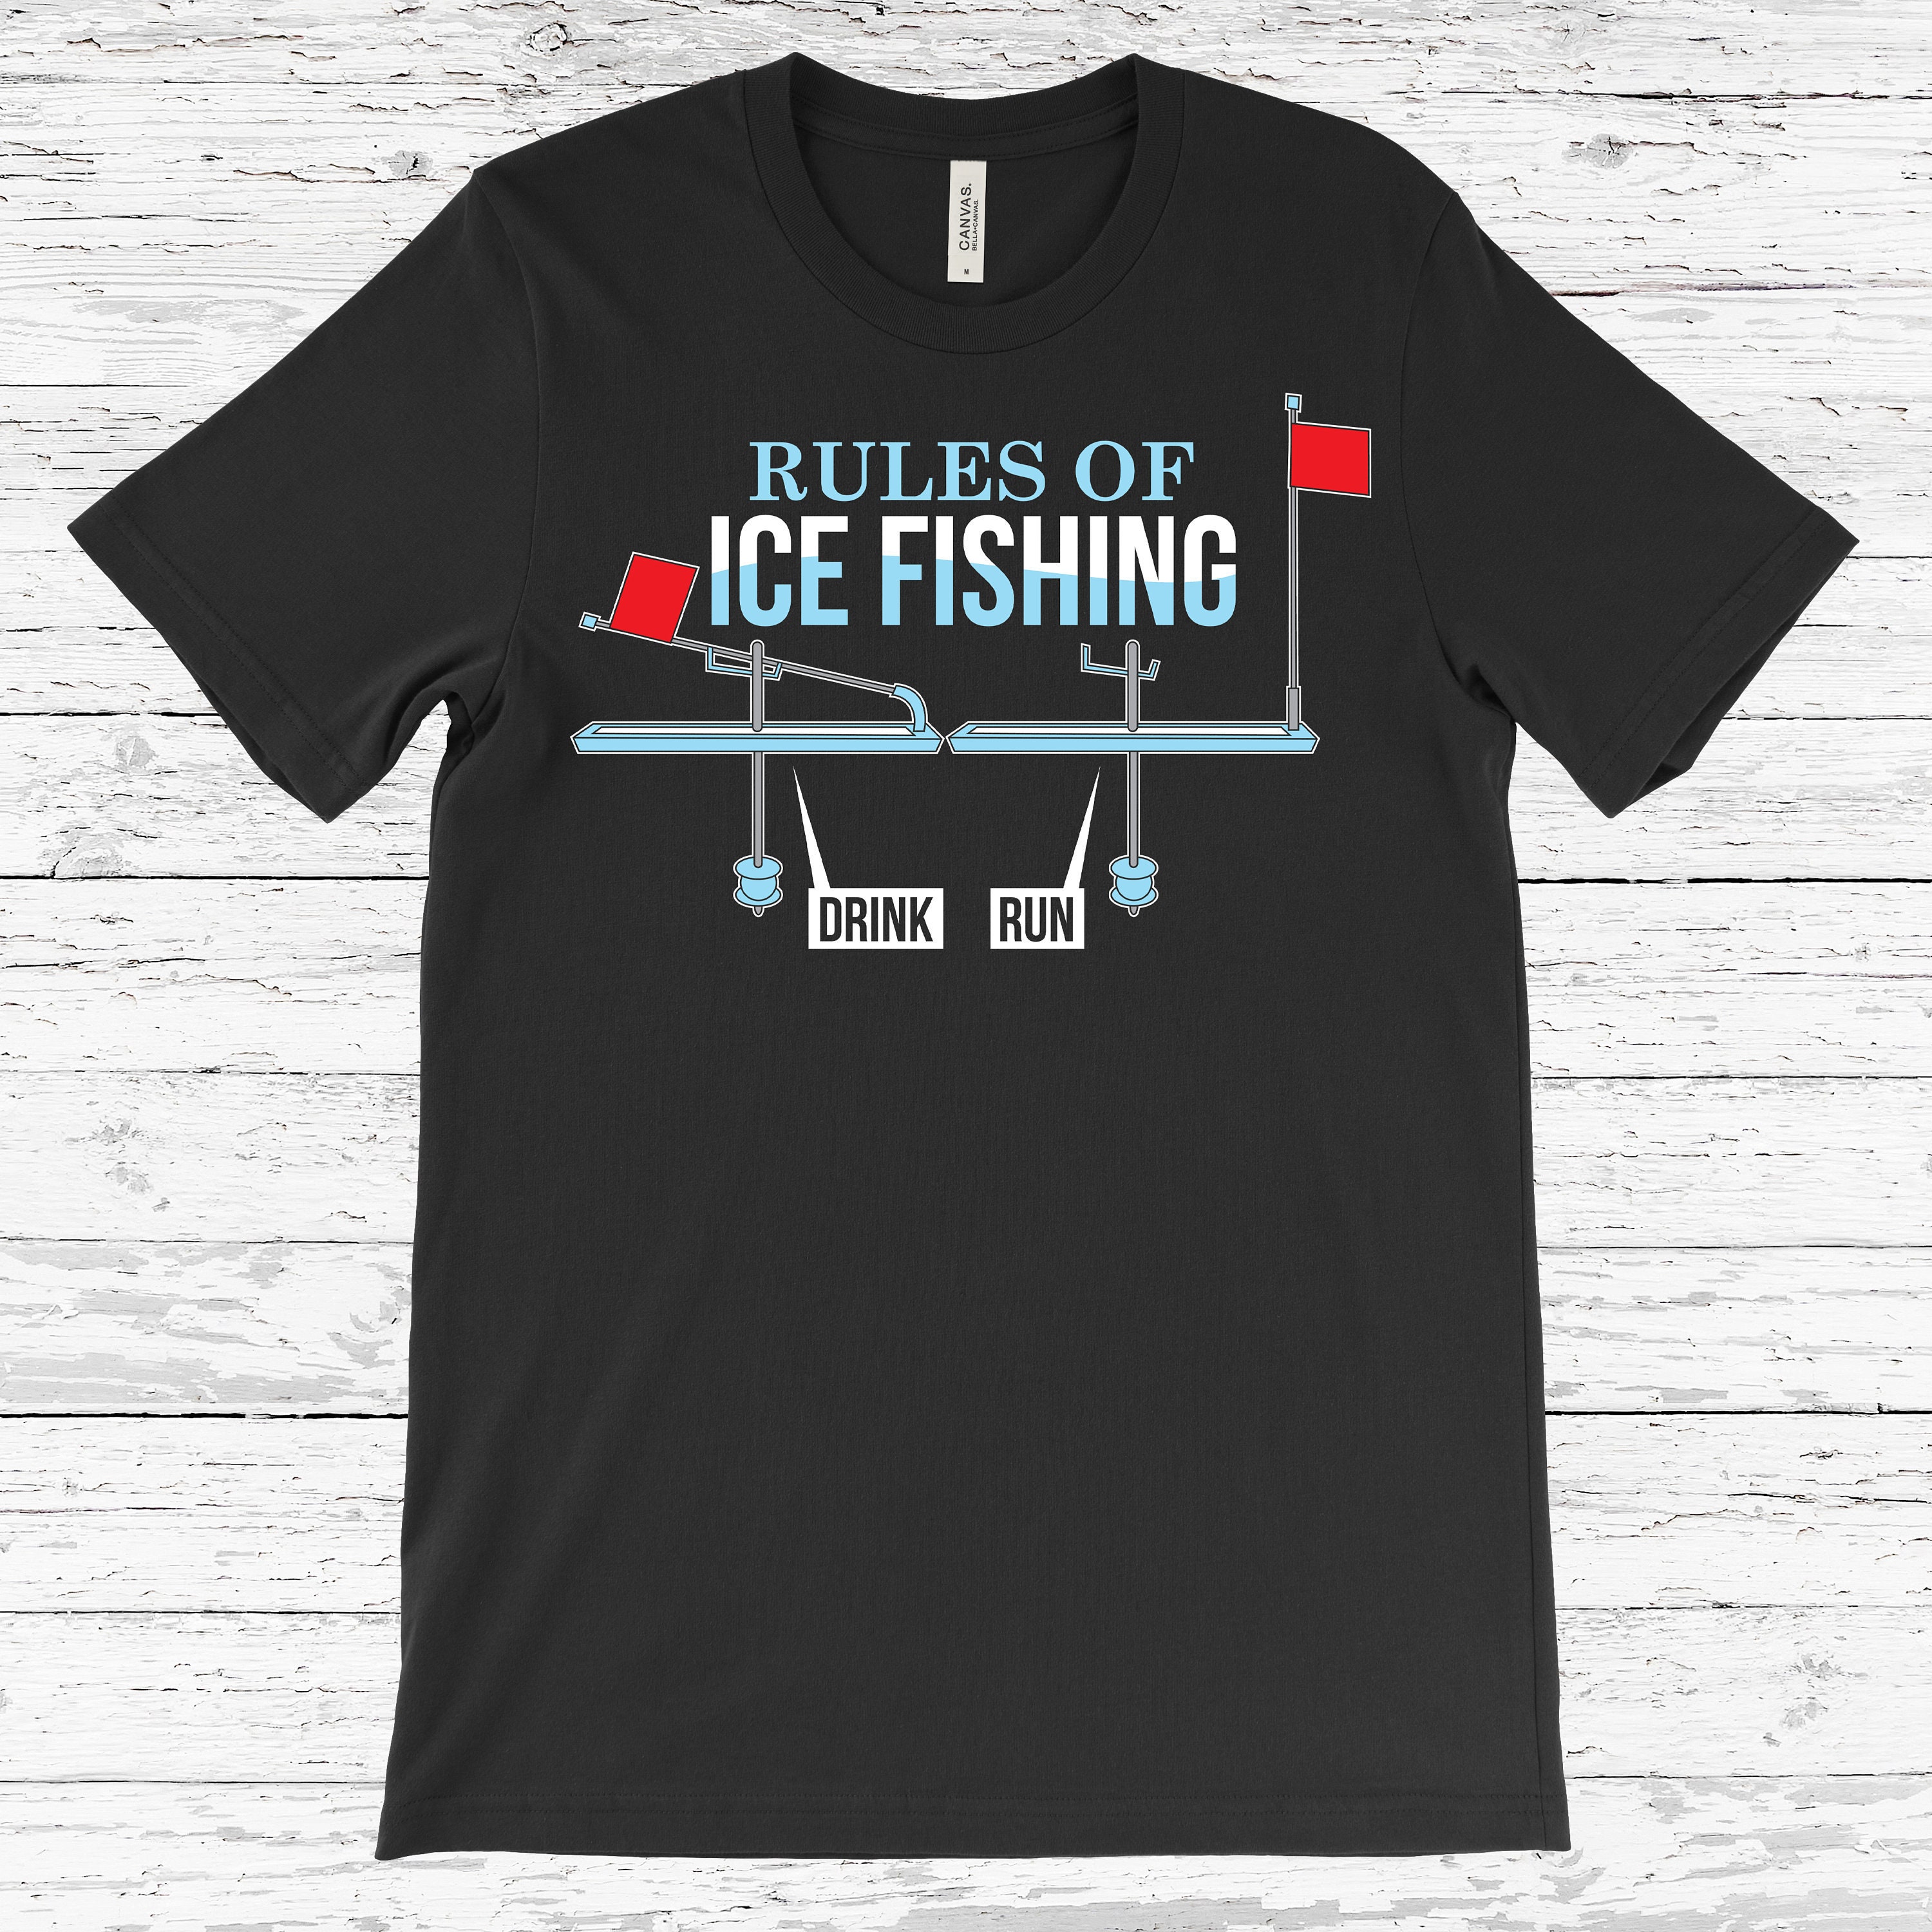 Rules of Ice Fishing T-shirt, Funny Winter Fishing Lovers Gift Tees,  Fisherman Present, Fish Frozen Lake Tshirt, Dad, Grandpa, Father's Day, -   Canada